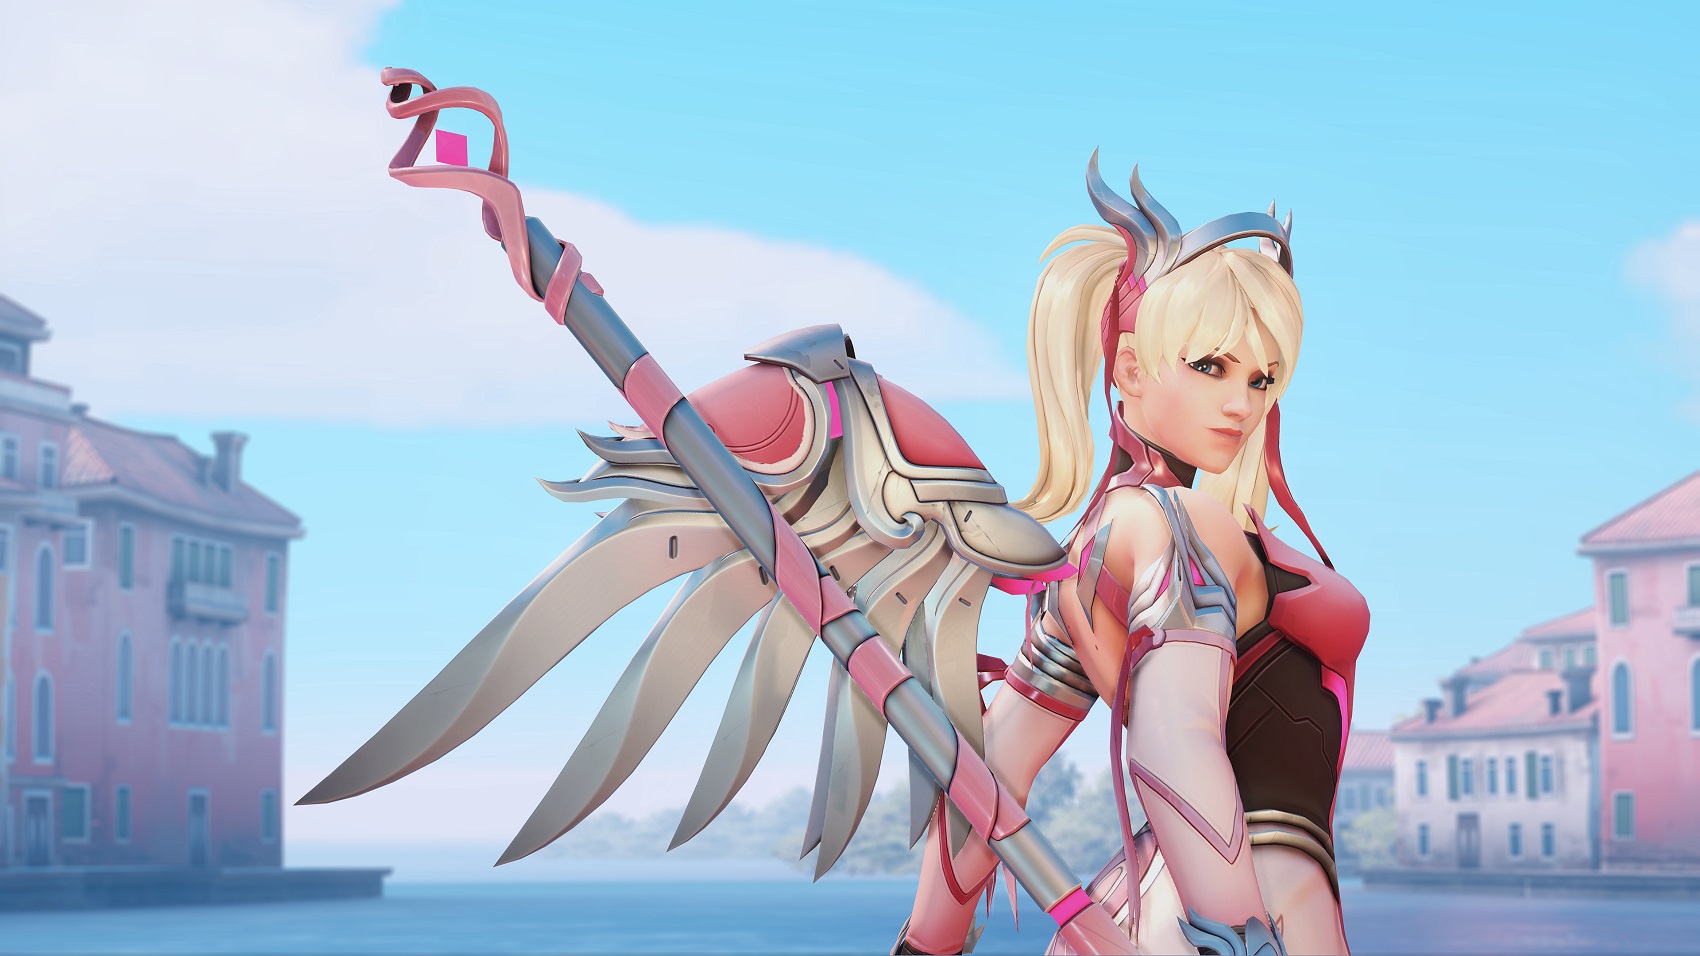 Today is the last day to buy Overwatch's Pink Mercy skin Dot Esports